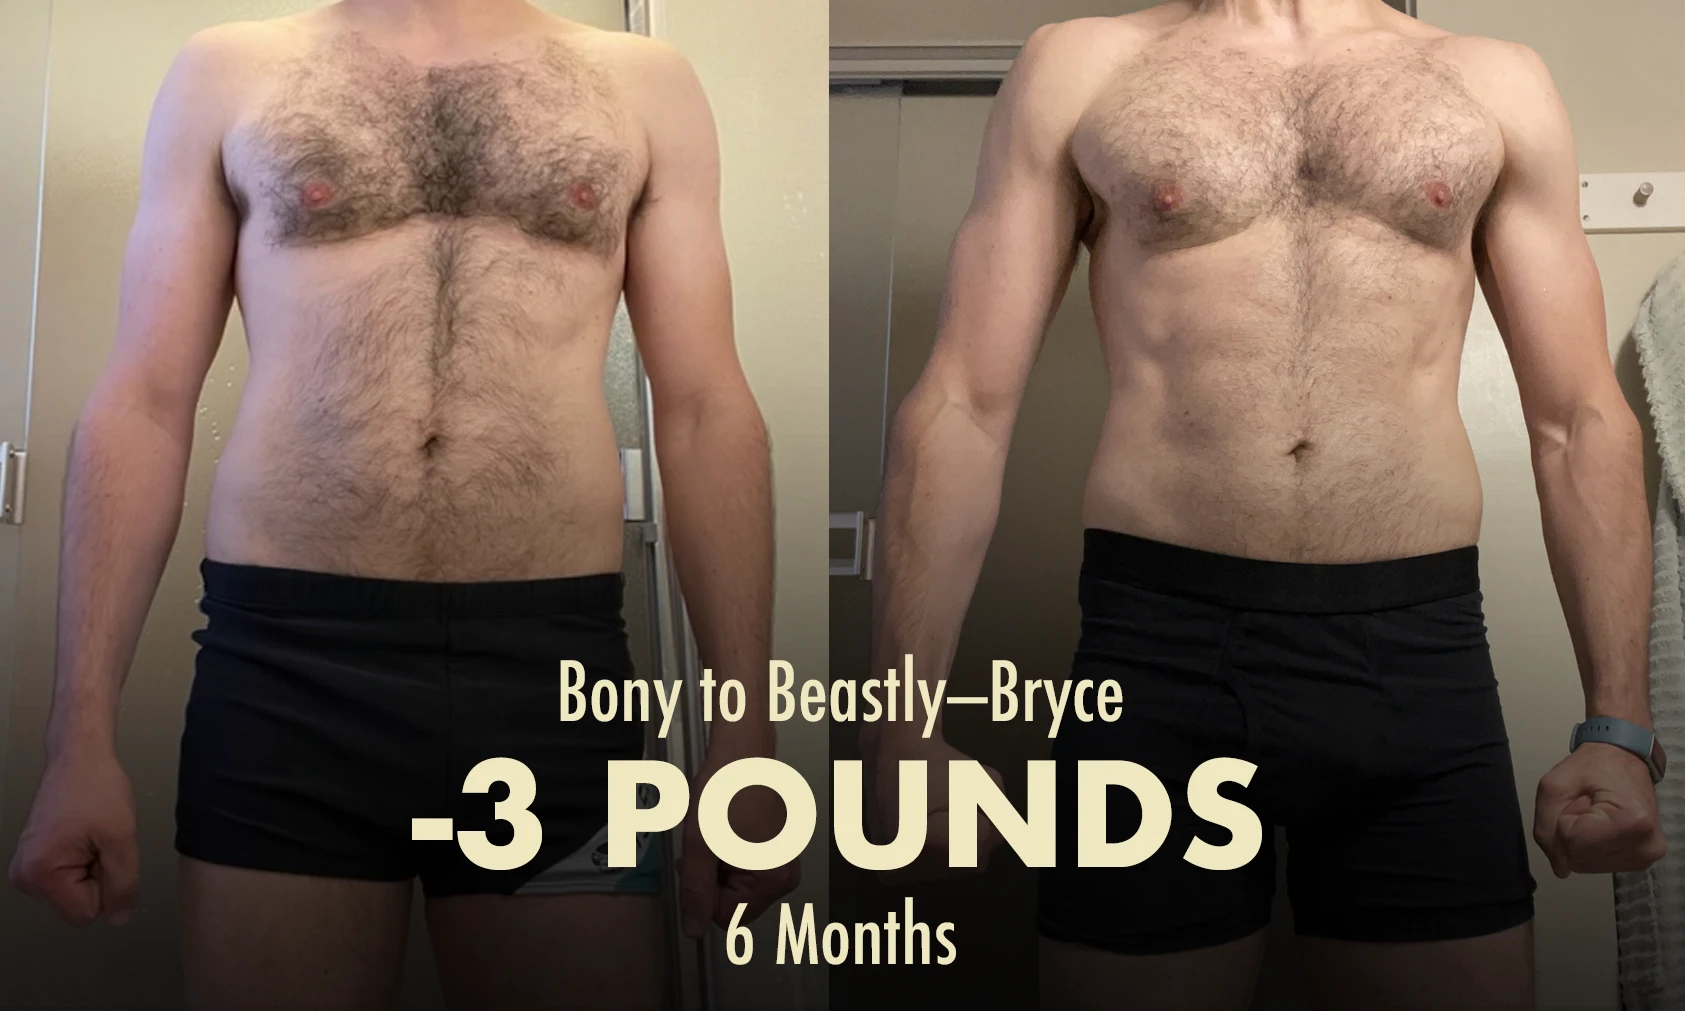 Before and after photo showing Bryce's recomp results from doing the Bony to Beastly Program.